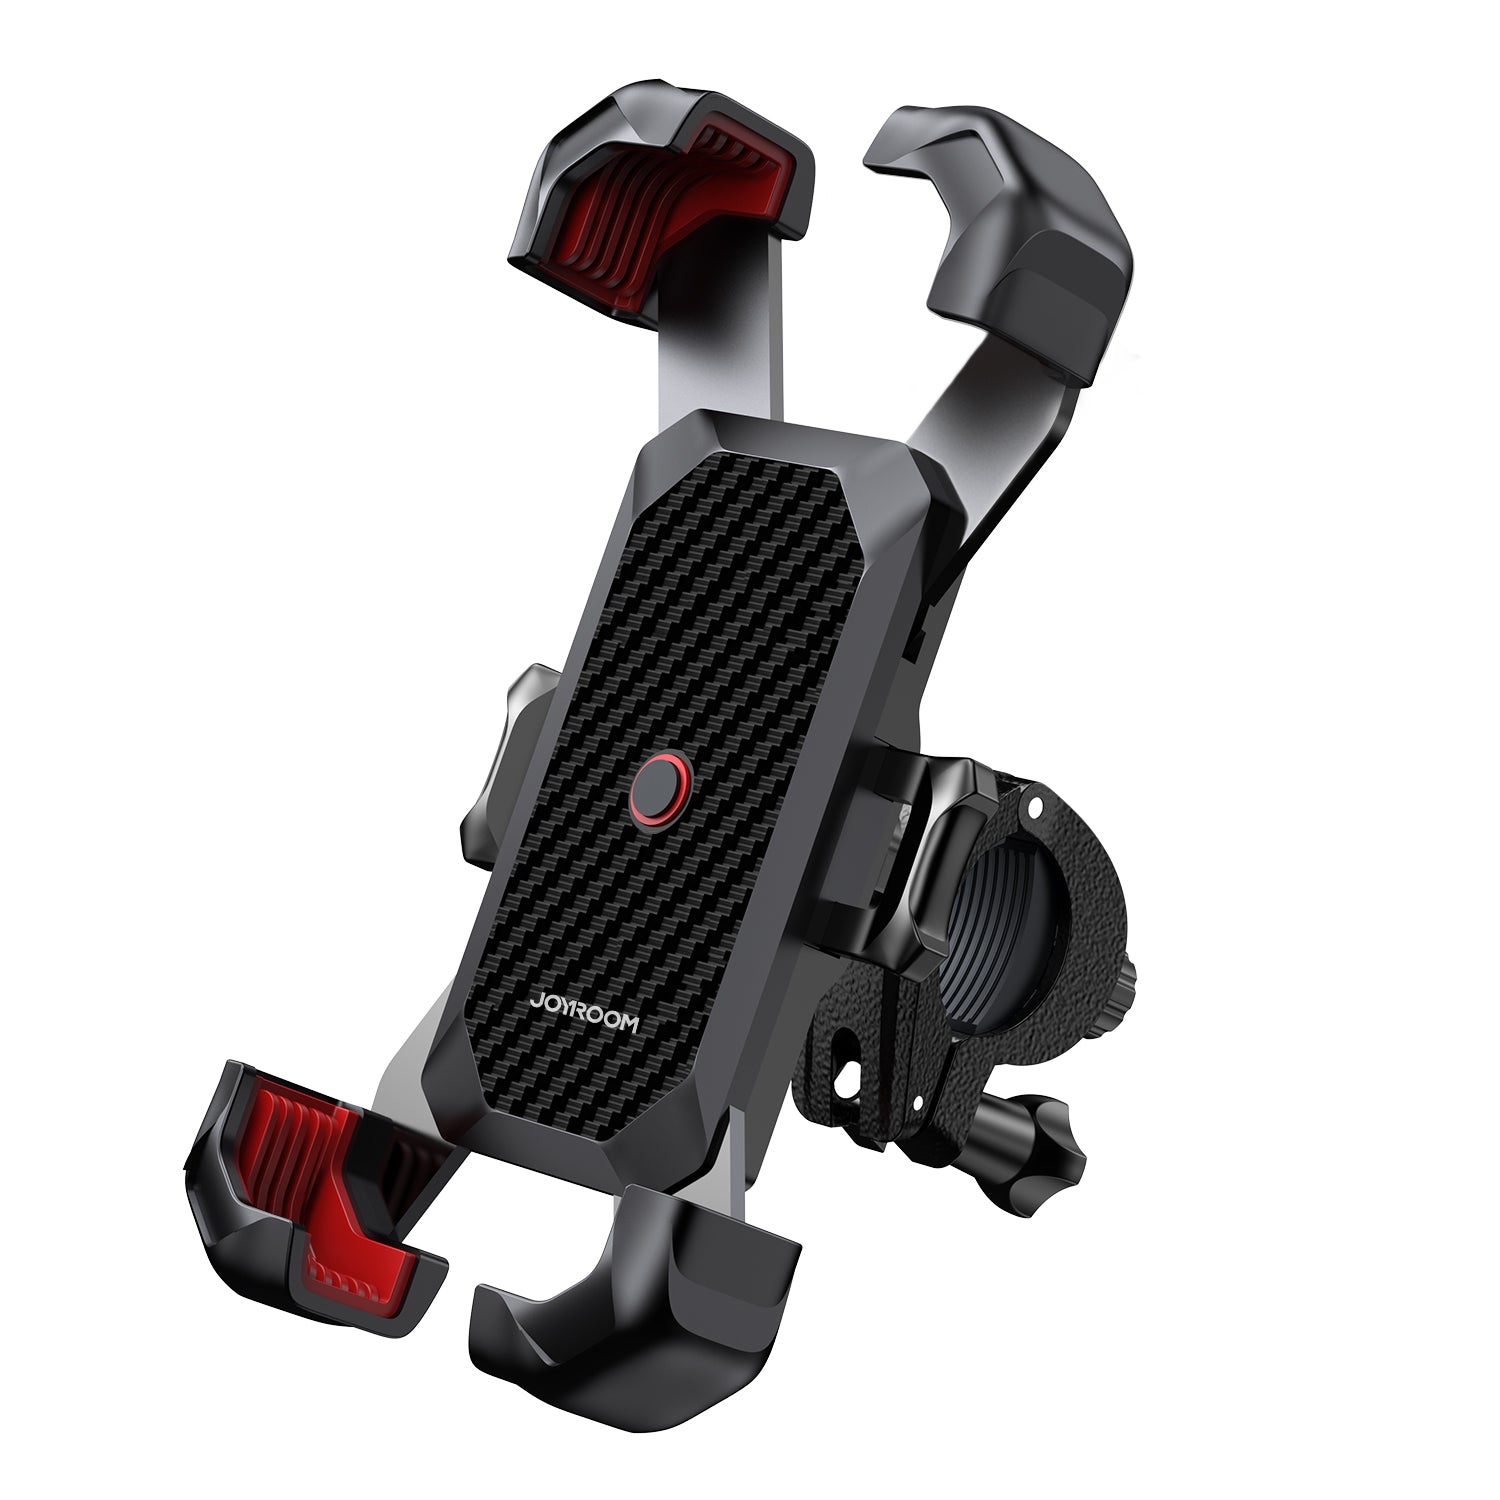 JR-ZS264 360°Rotation One-Push Motorcycle Phone Mount